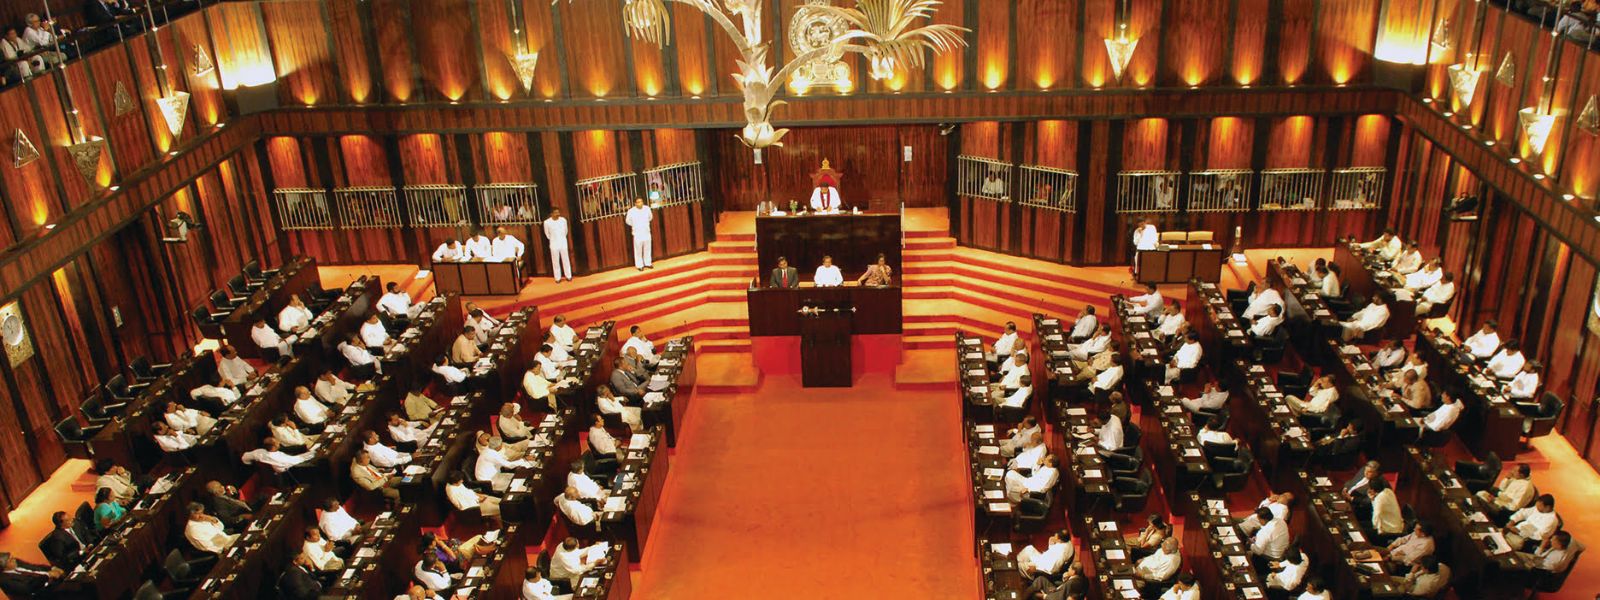 Law College Exams: Parliament votes against English Only gazette